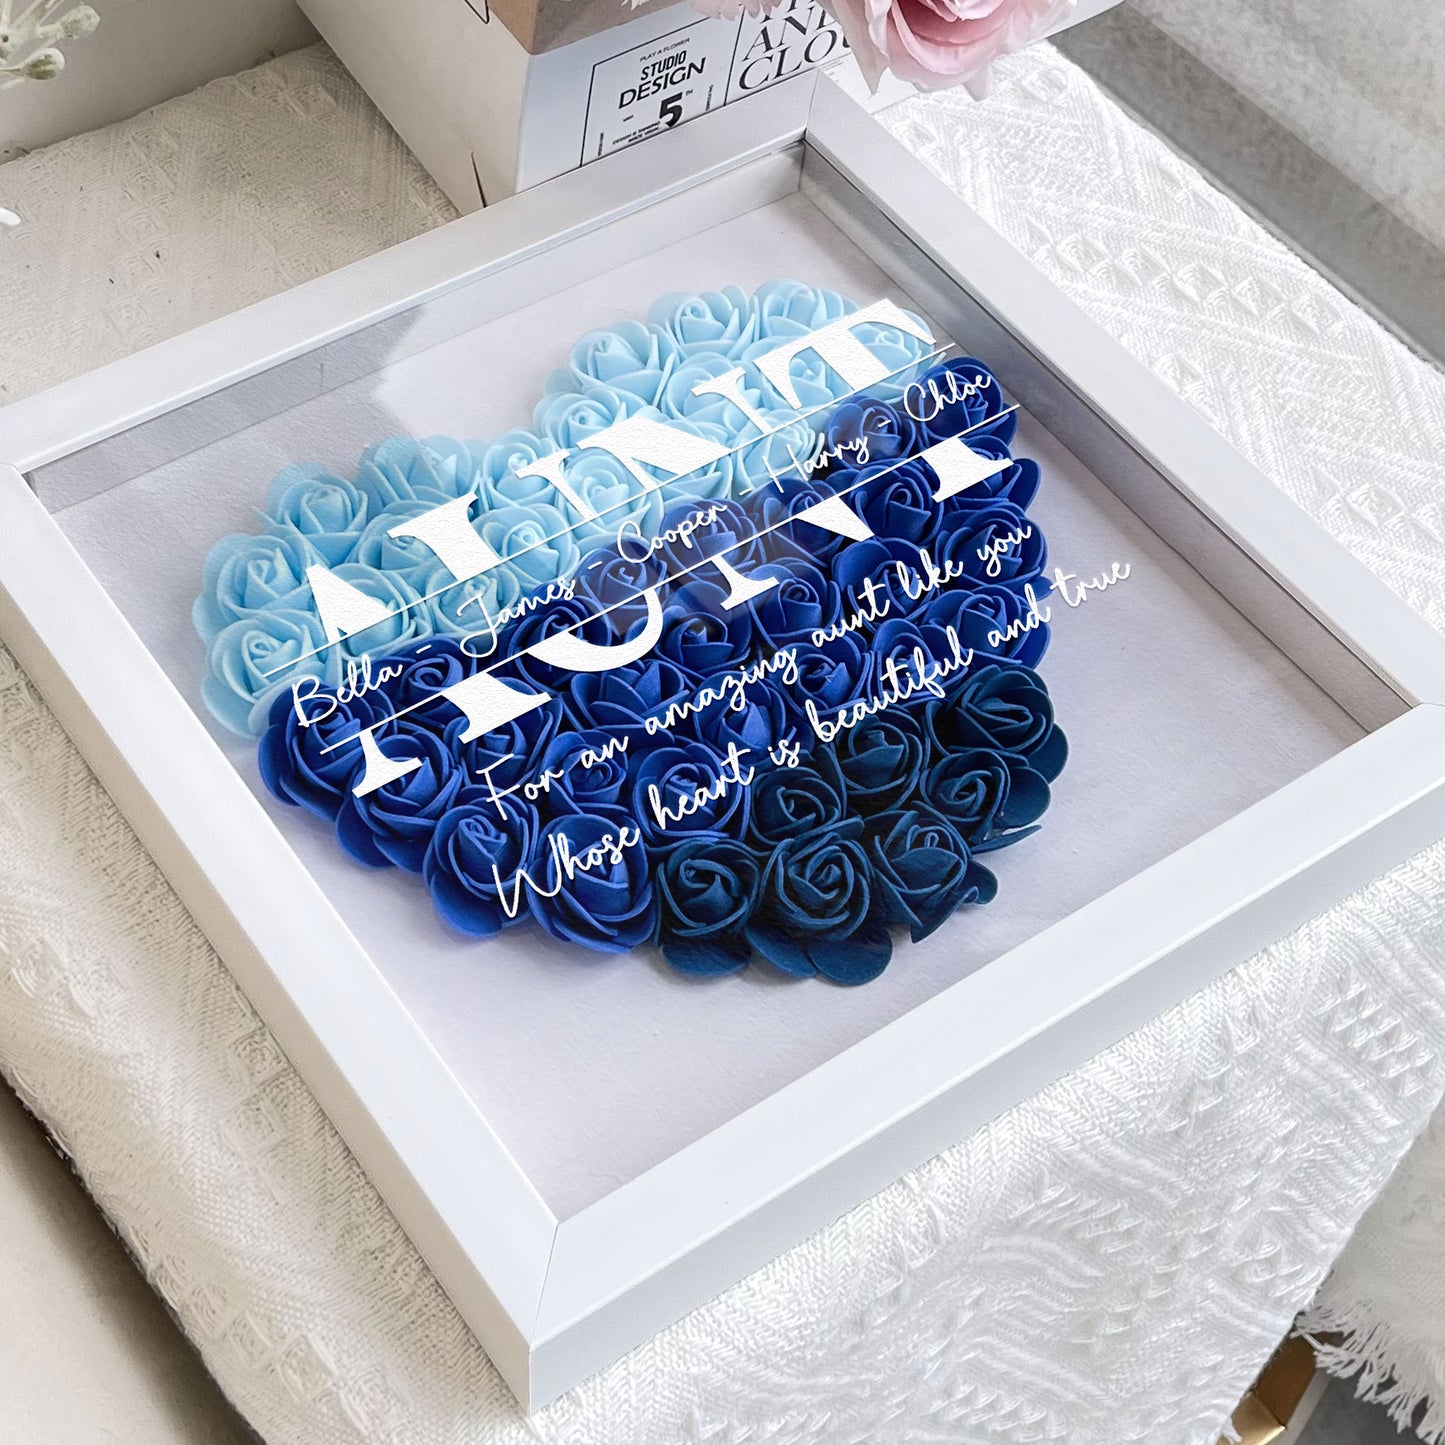 For An Amazing Aunt Like You - Personalized Flower Shadow Box